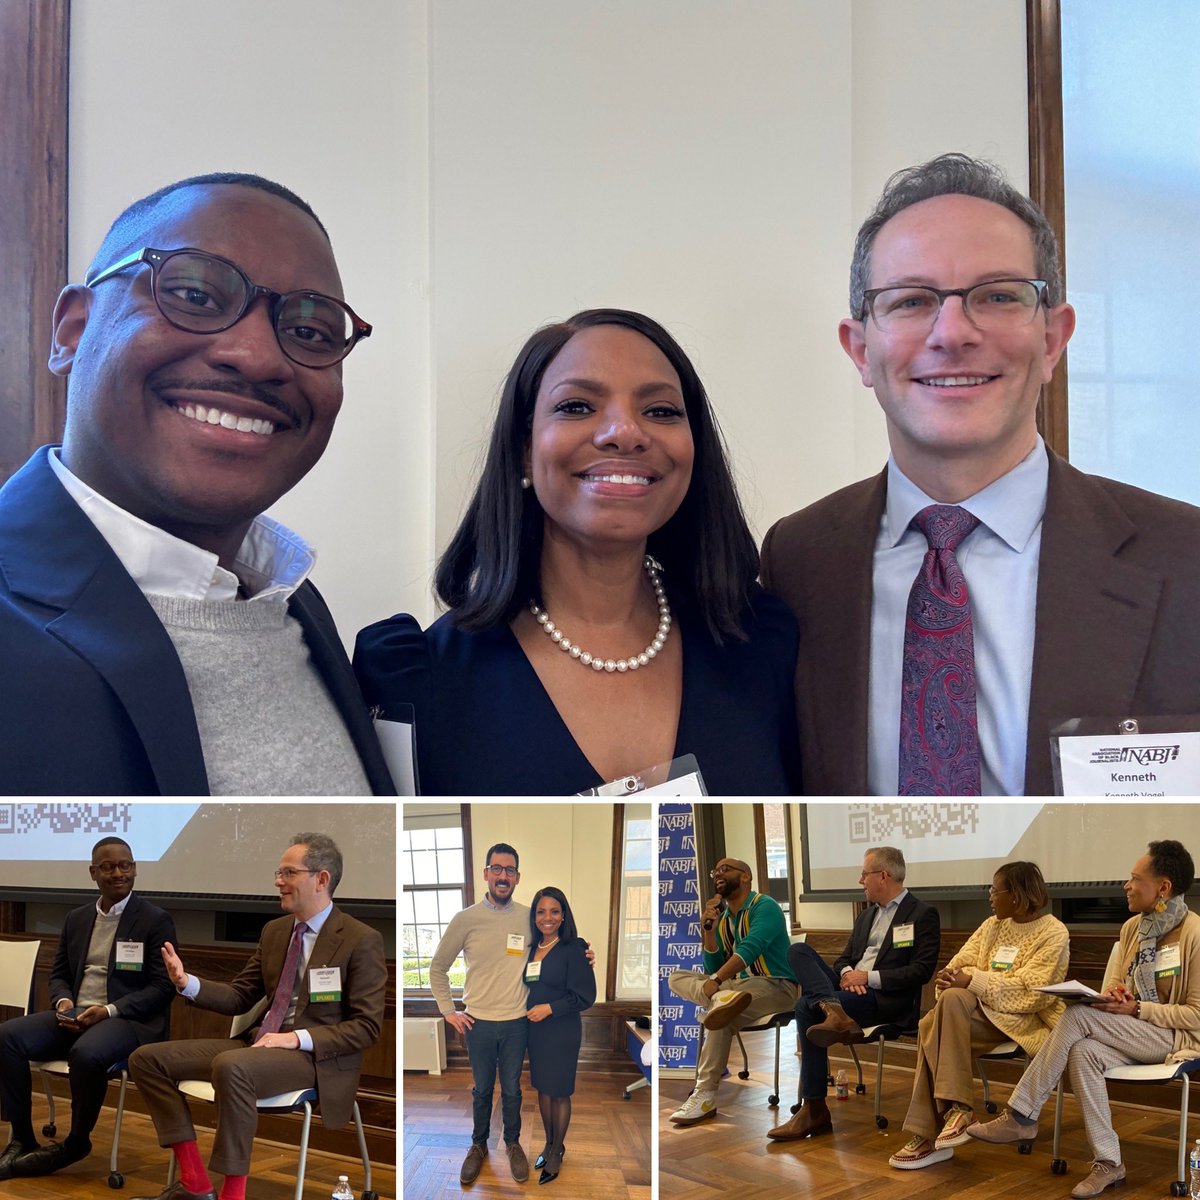 The inaugural #NABJPolitical #Journalism Media Institute was fantastic! Honored to moderate & listen to some great panel discussions about tools & tips to cover candidates wt @christianjhall @kenvogel @AsteadWH @jeffzeleny @errinhaines #NABJPolitical